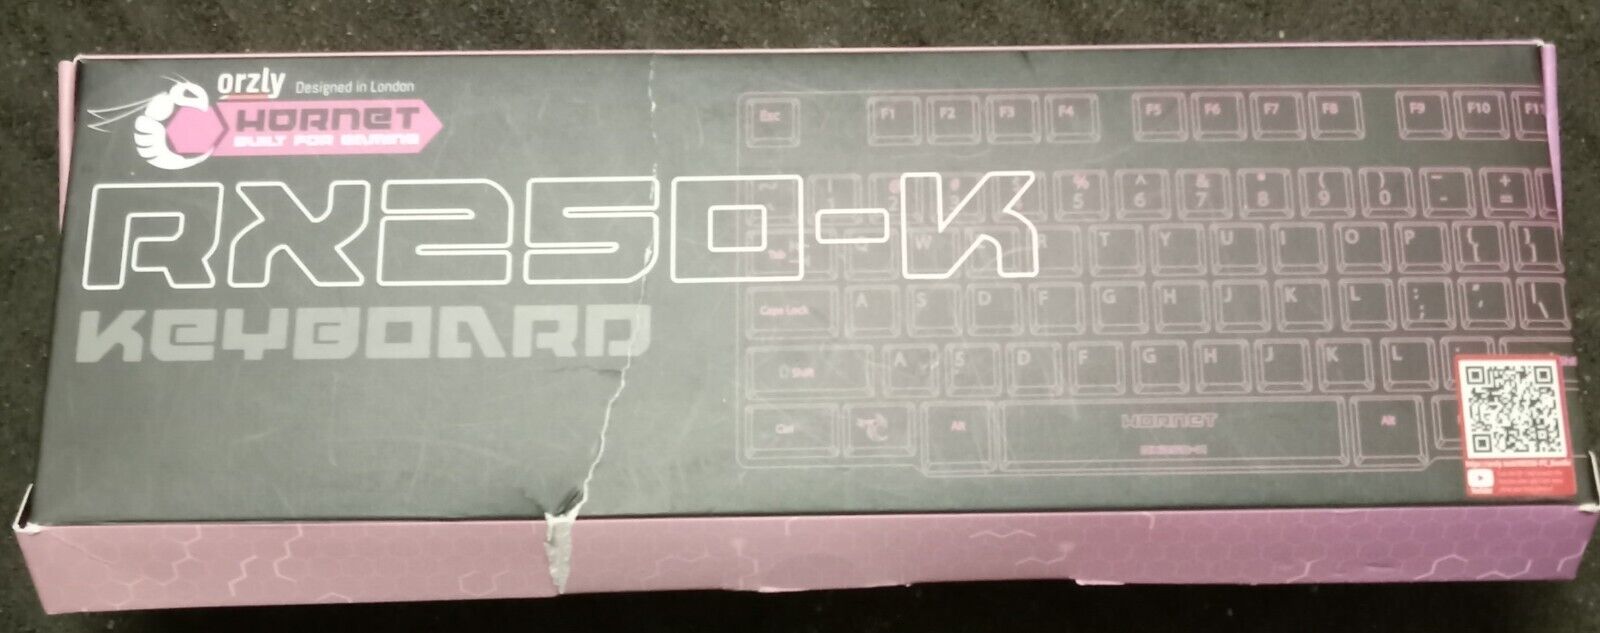 NEW ORZLY PINK HORNET RX250-K Keyboard Built For Gaming